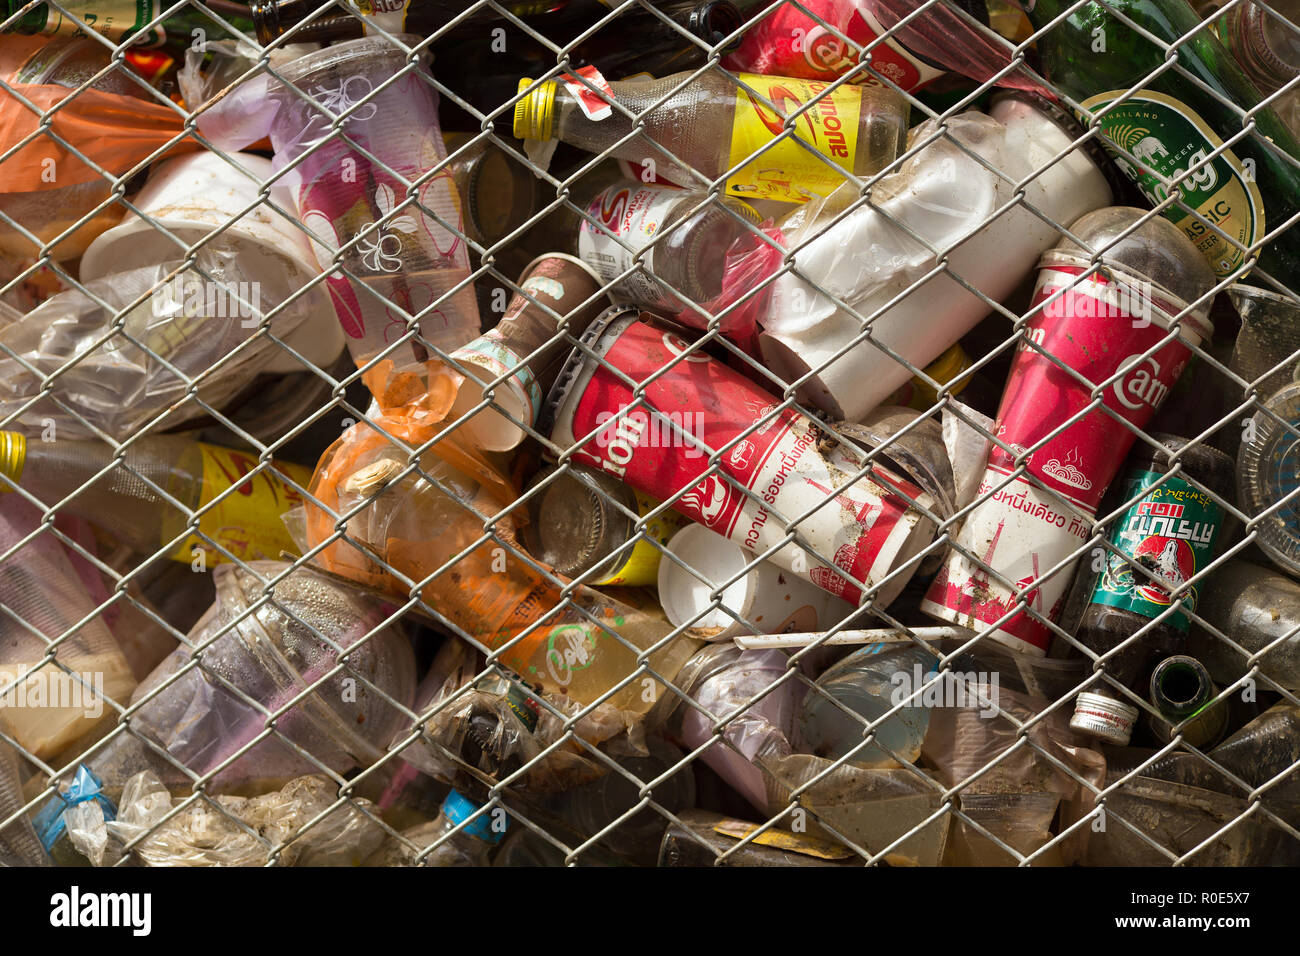 SANGHLABURI, THAILAND, JANUARY 24, 2016 : A fenced public bin is full of soda cans, glass bottel and other drinks in Sangkhlaburi, Thailand Stock Photo